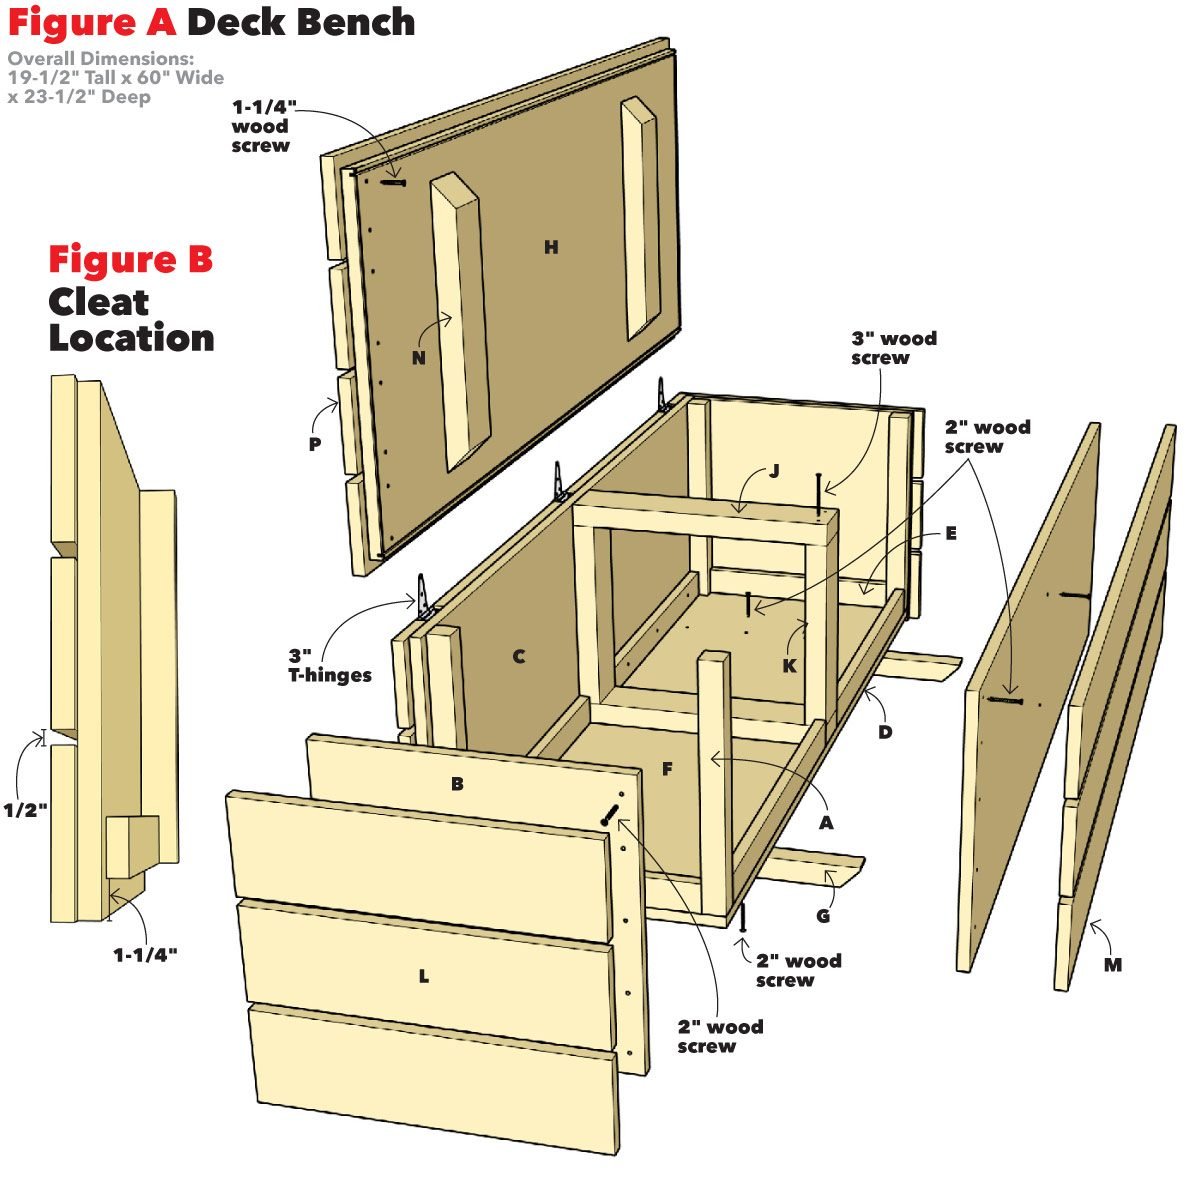 How to Build an Outdoor Storage Bench Family Handyman